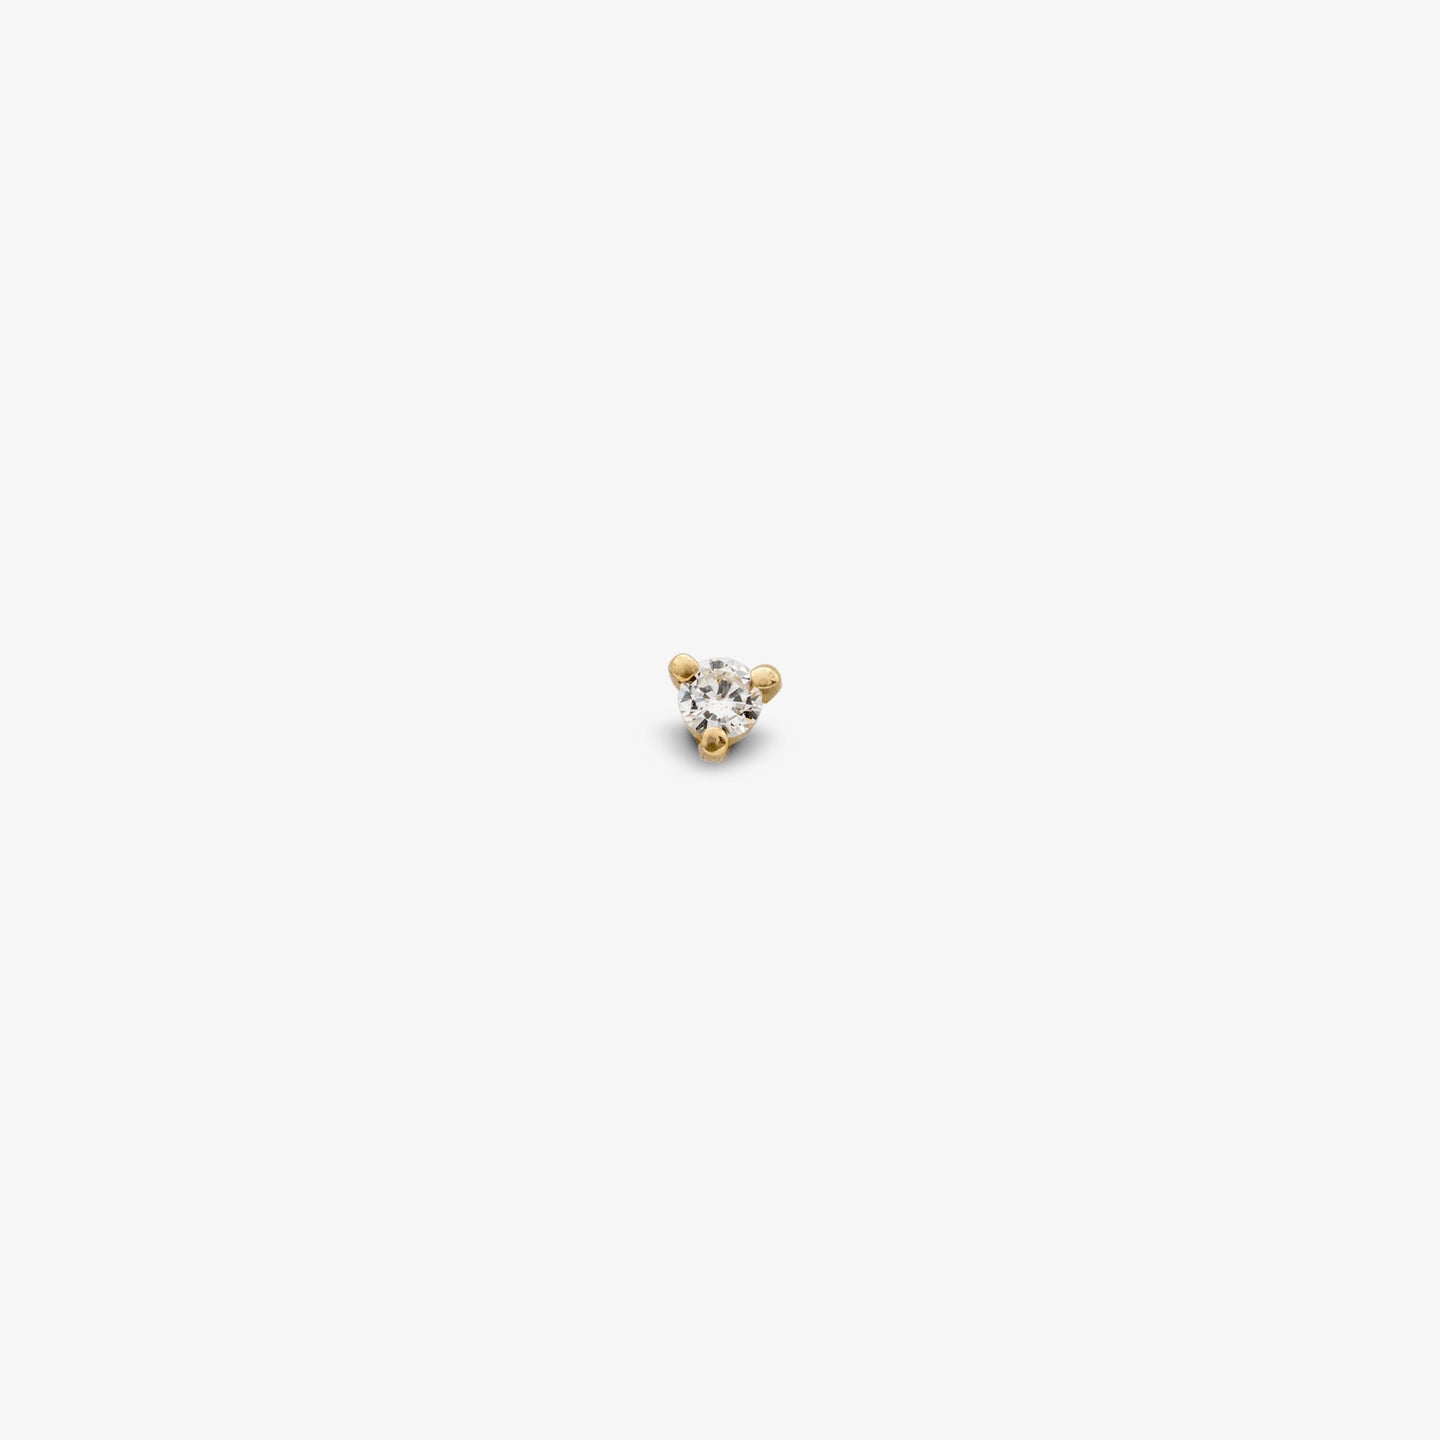 This is a small 14k gold stud with a diamond color:null|gold/diamond